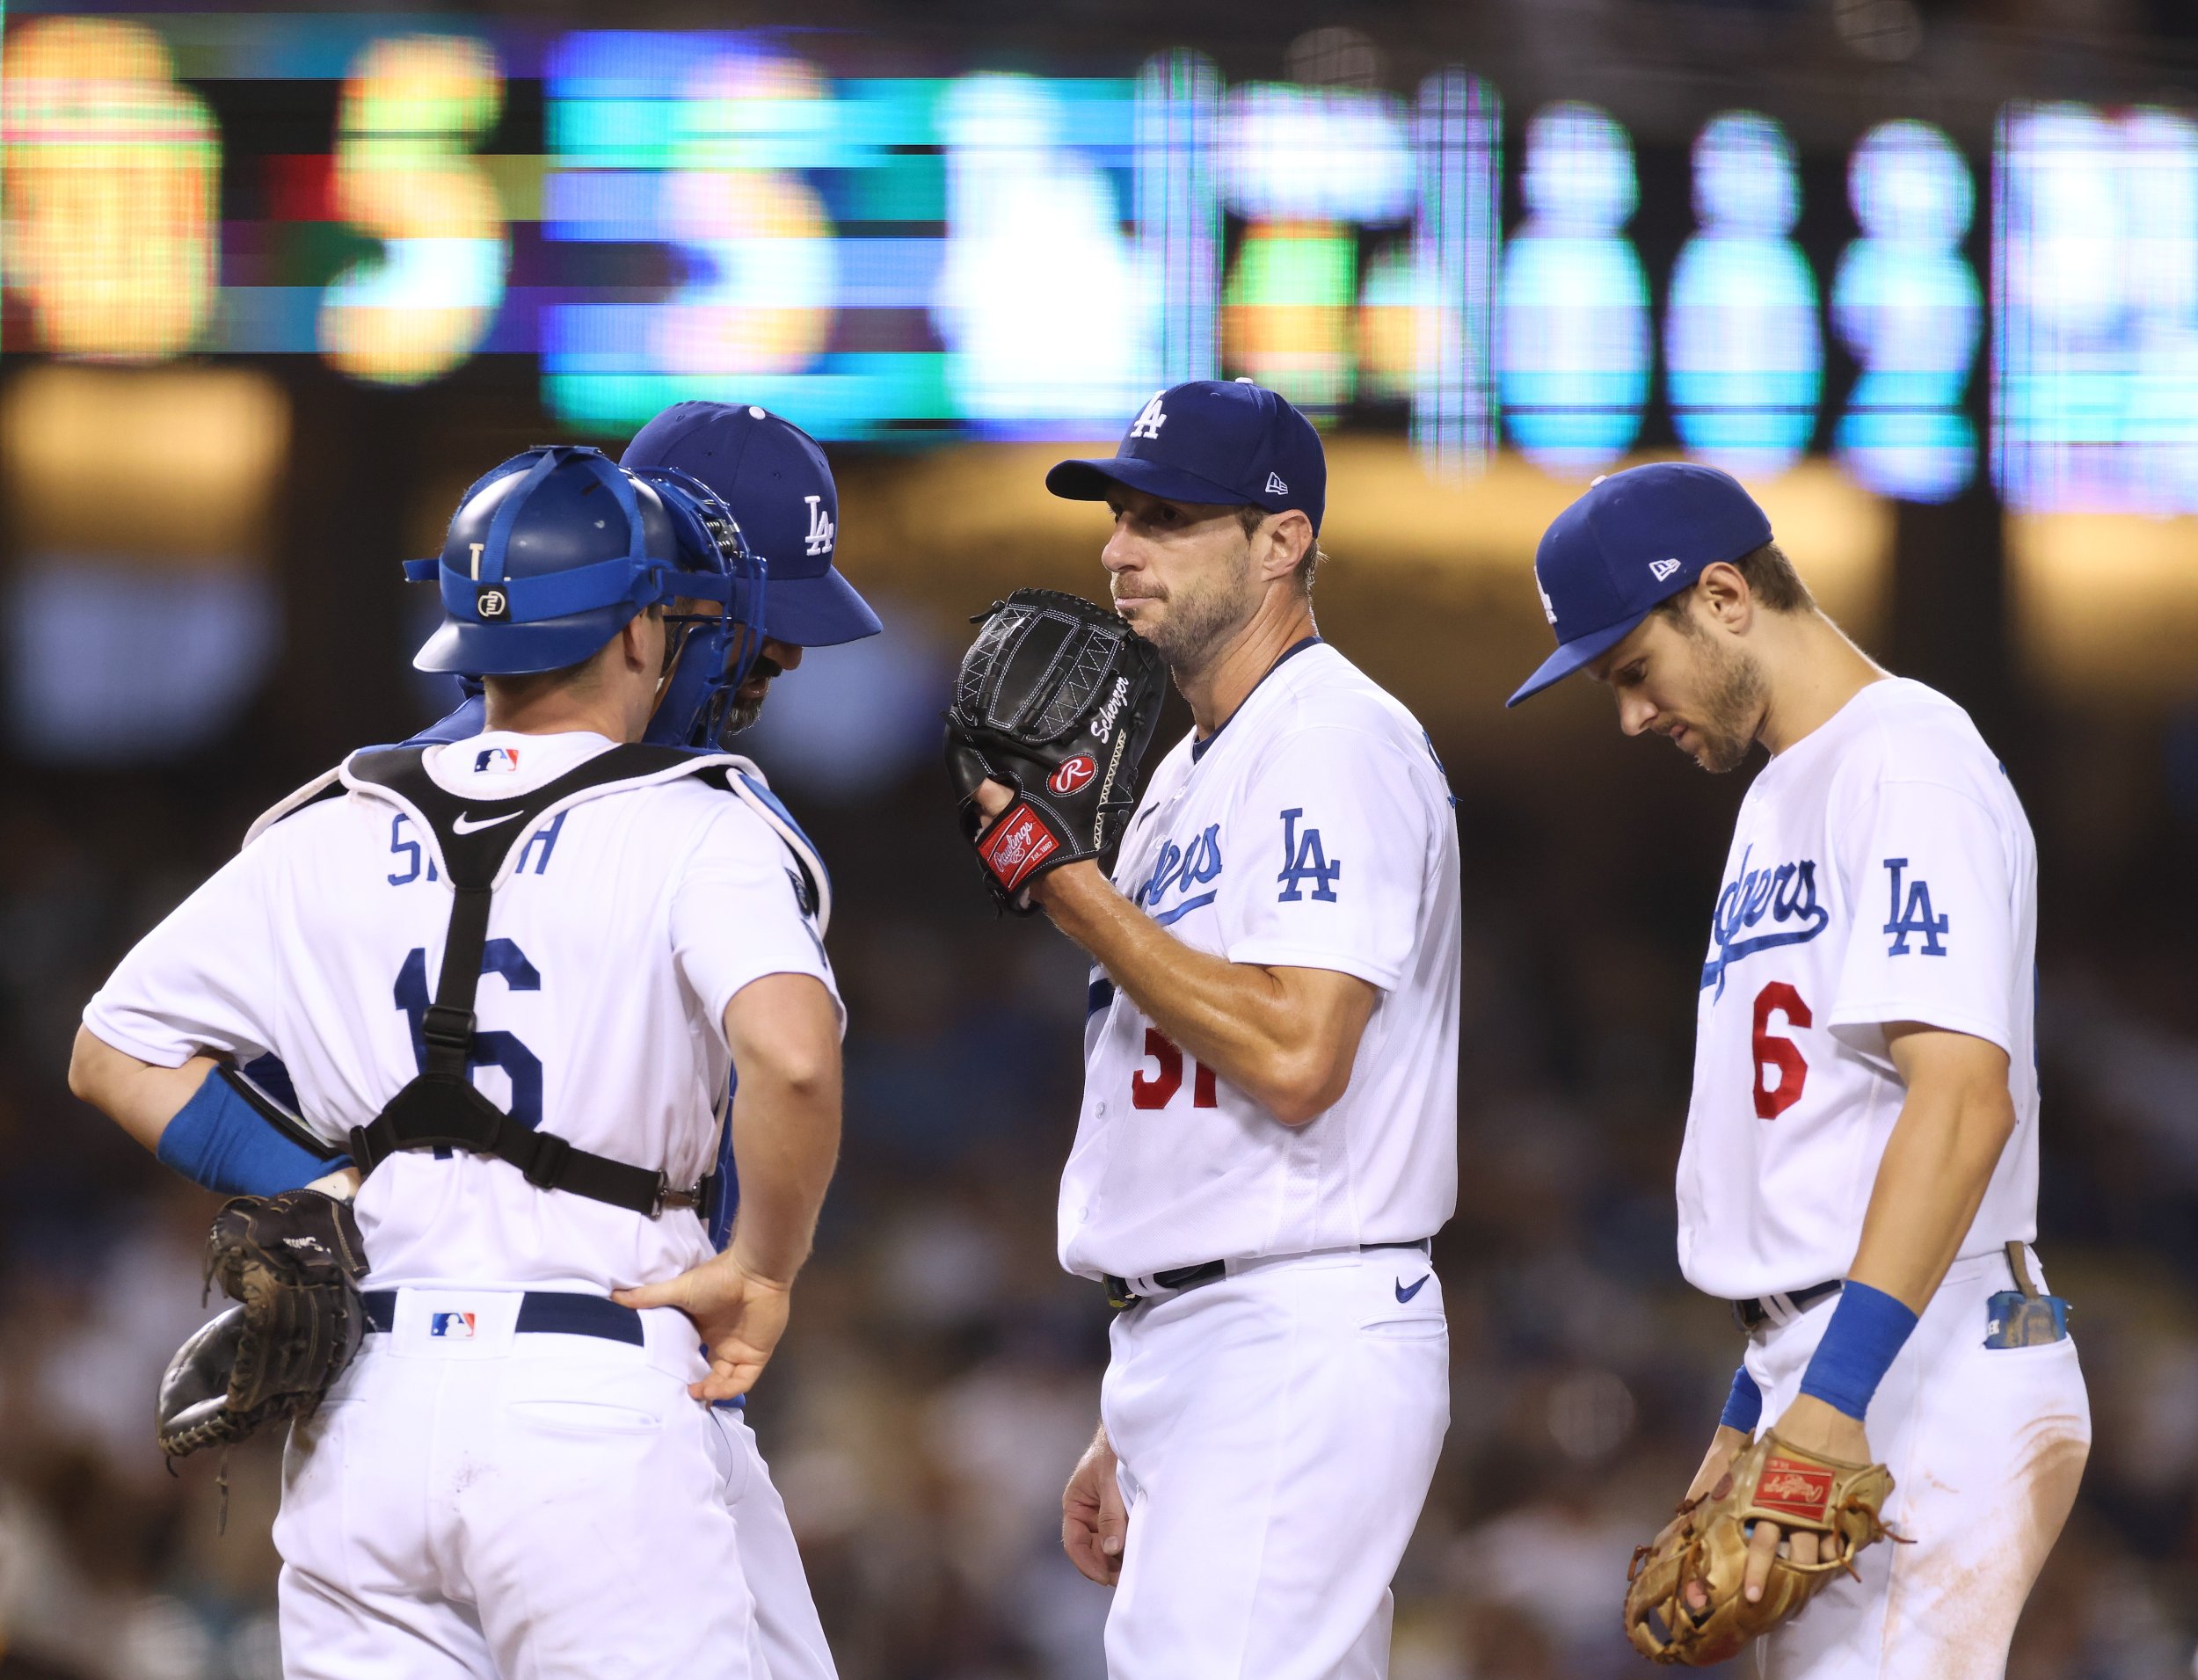 Dodgers vs. Braves NLCS: Prediction, Betting Odds, TV Schedule For 2021